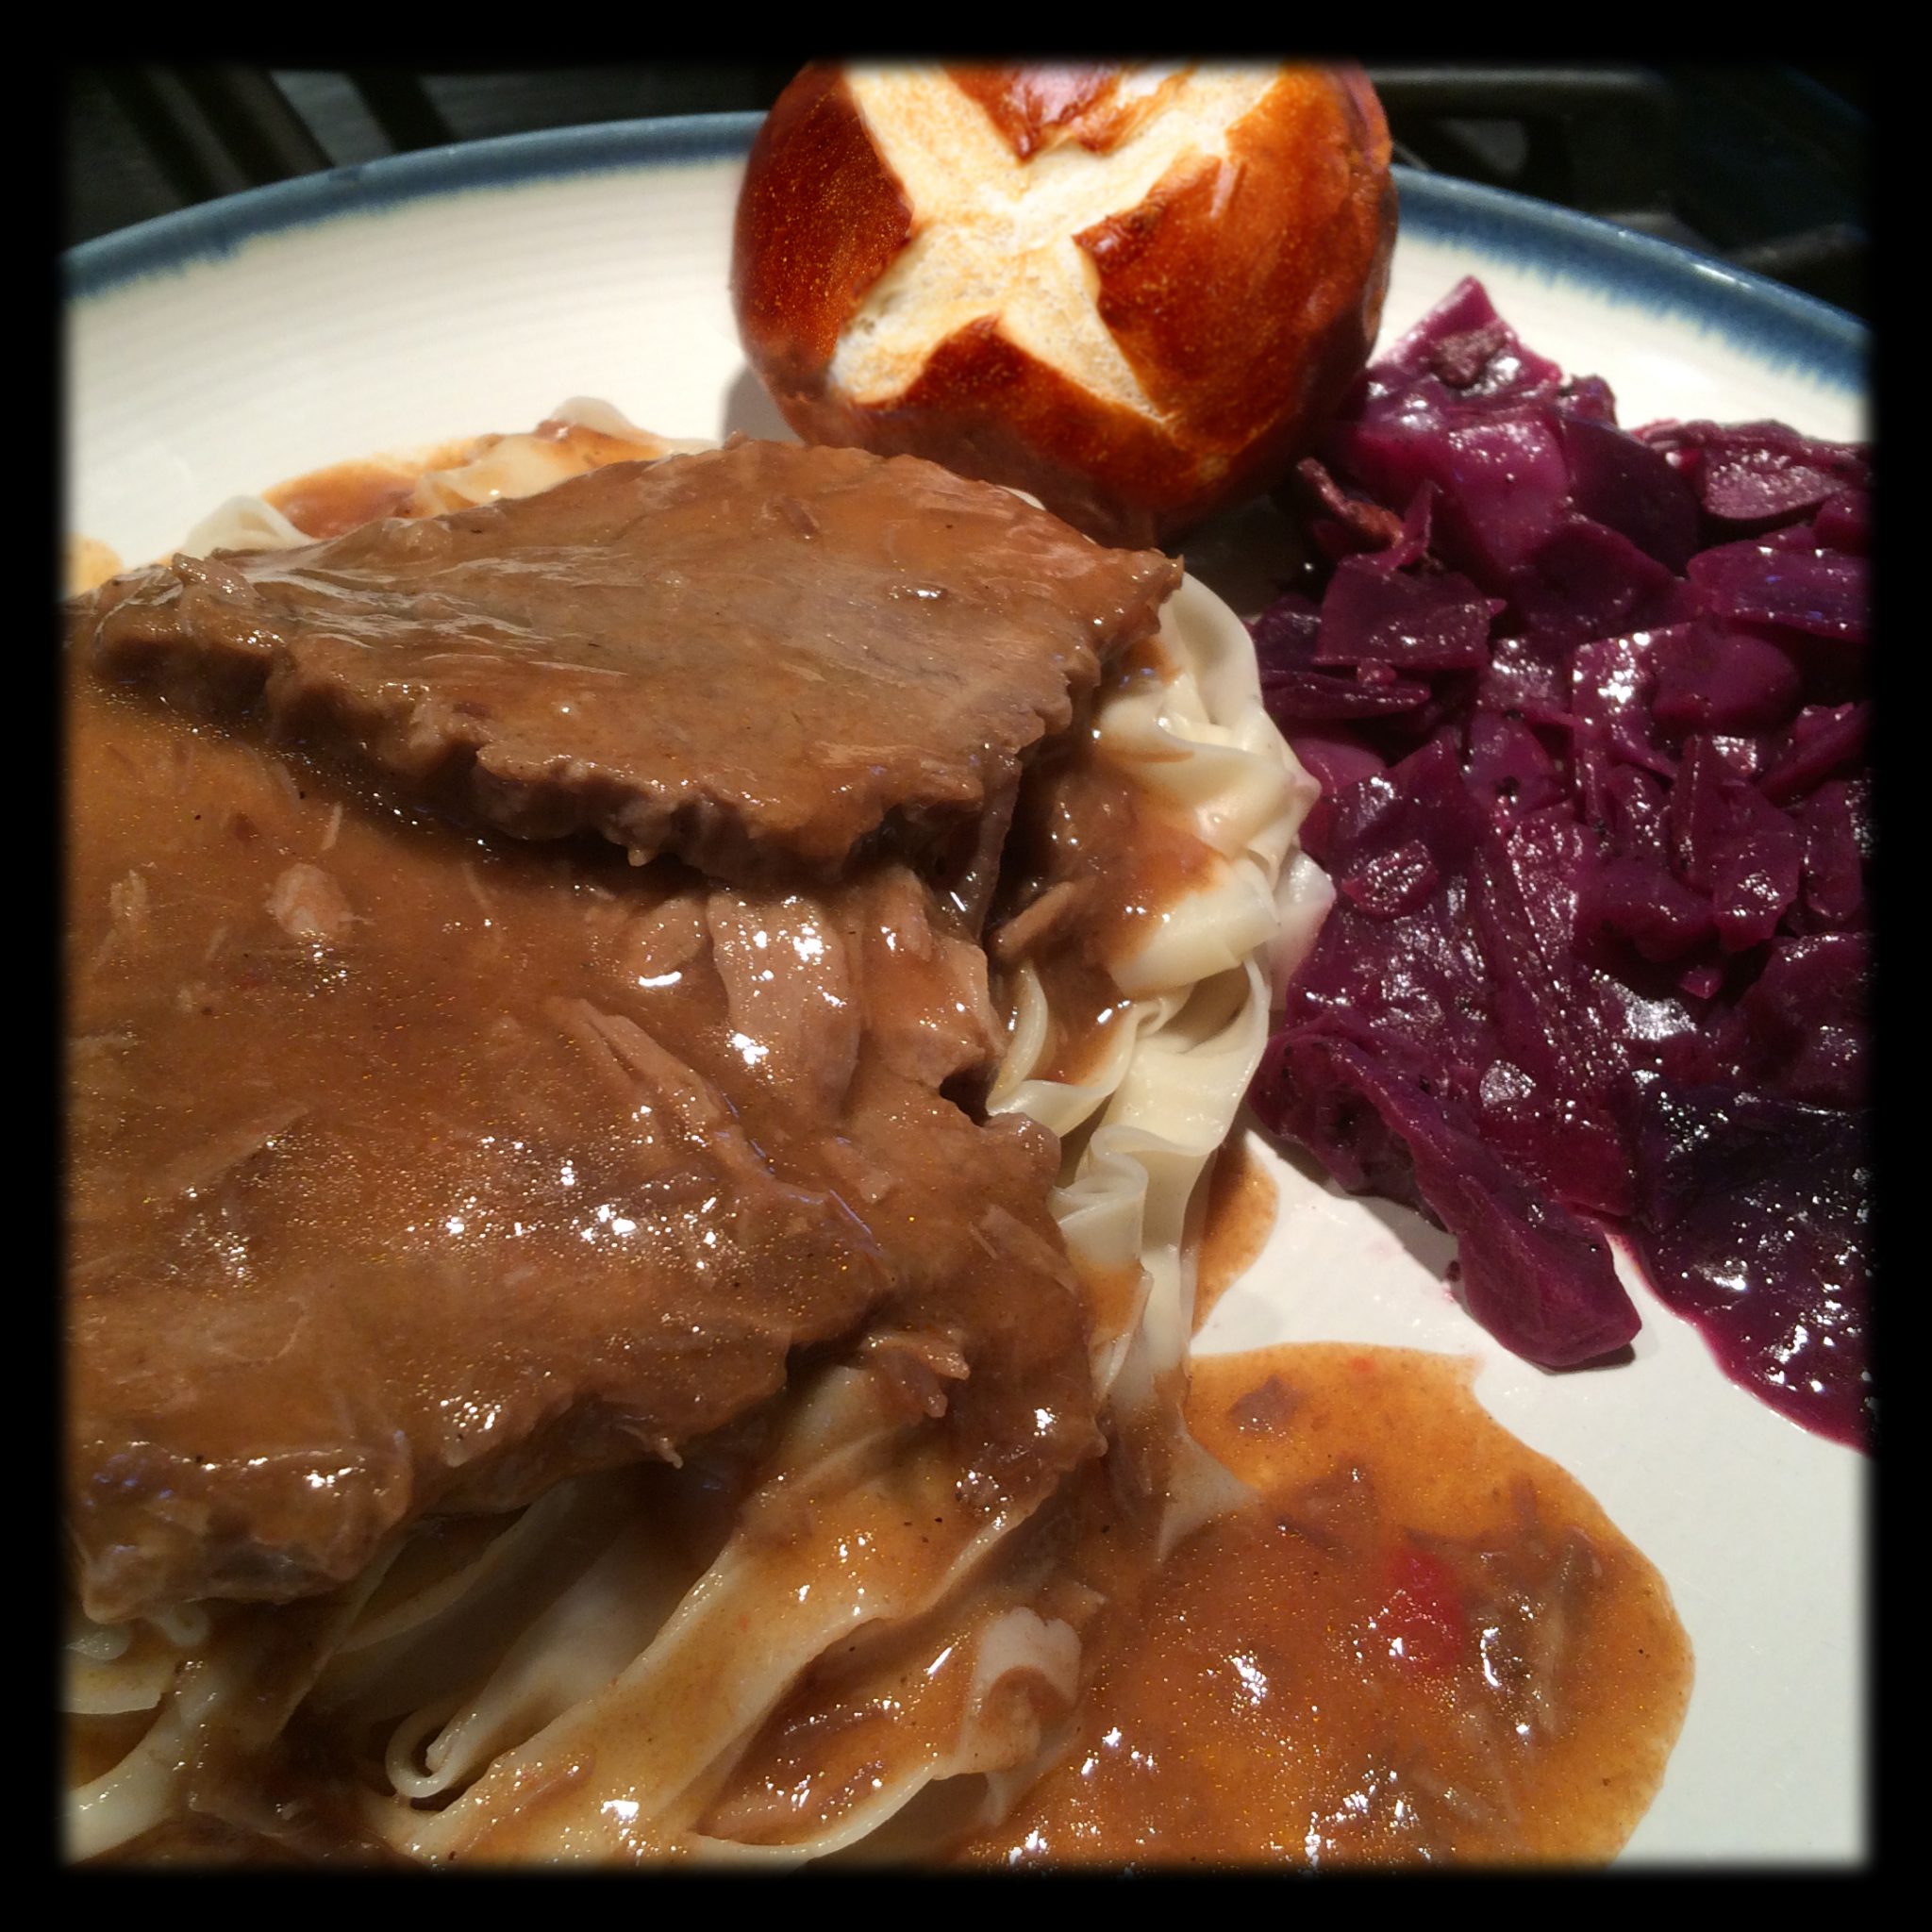 sauerbraten recipe with pickling spice